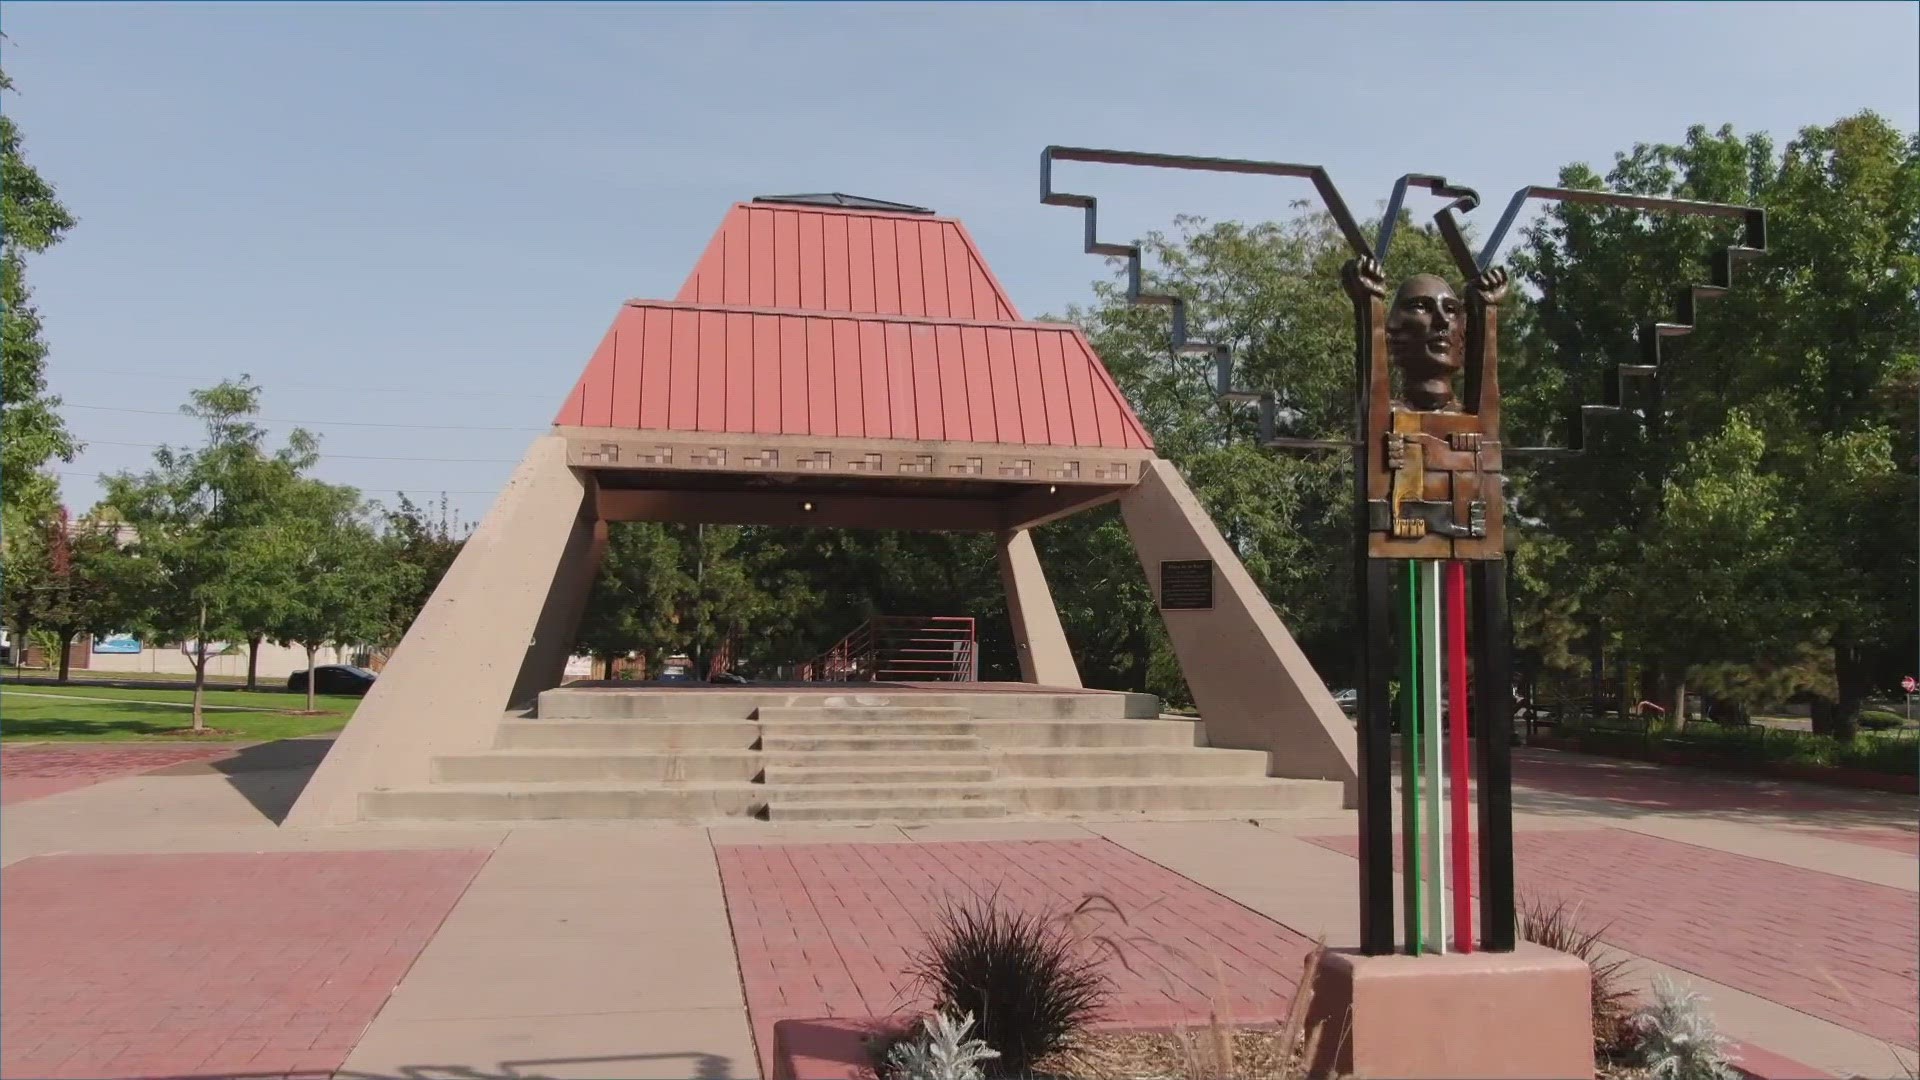 The park was a staple of the Chicano Movement in Denver in the '70s and '80s. Several protests were held there and it became a community gathering point.